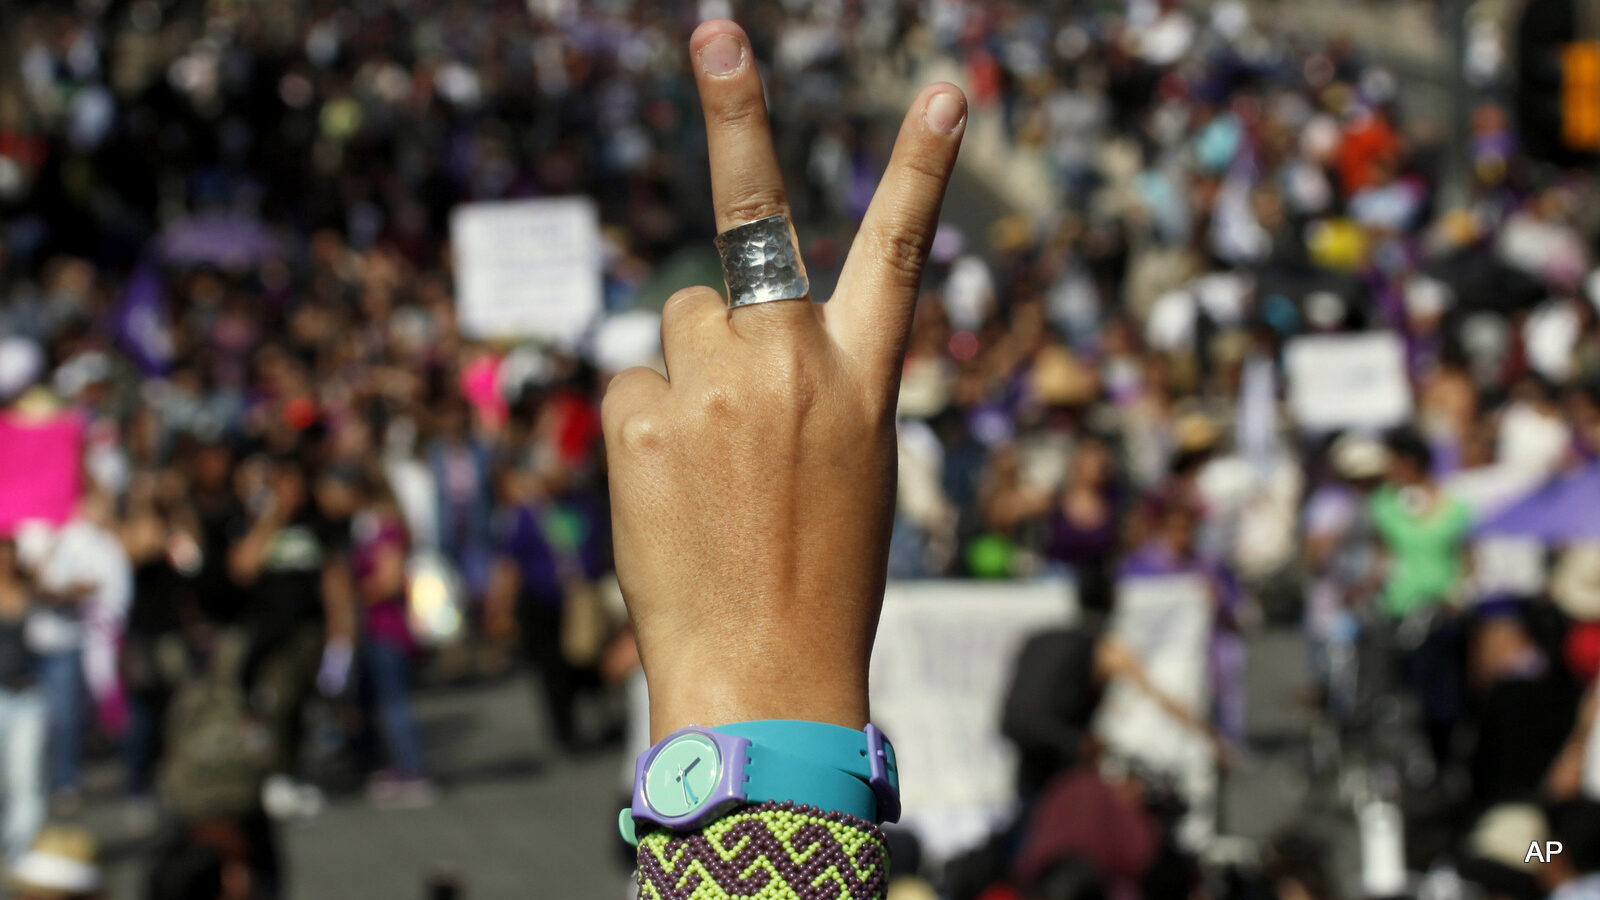 A female demonstrator flashes a victory sign.